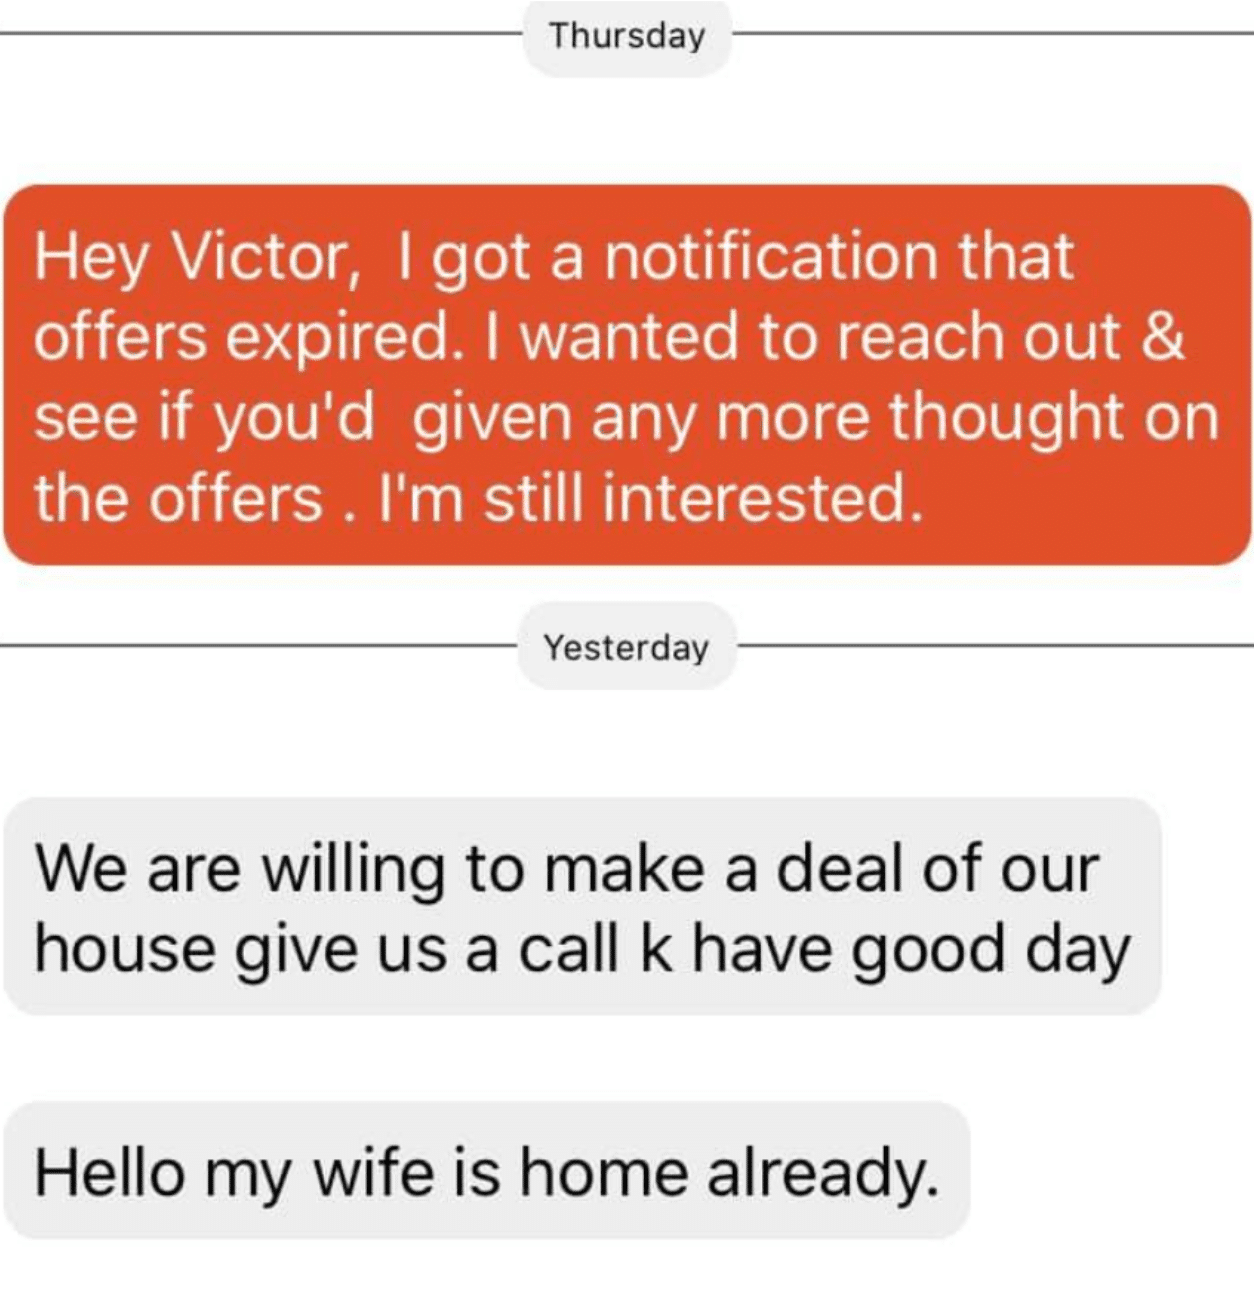 another real life example of text message marketing for real estate investors